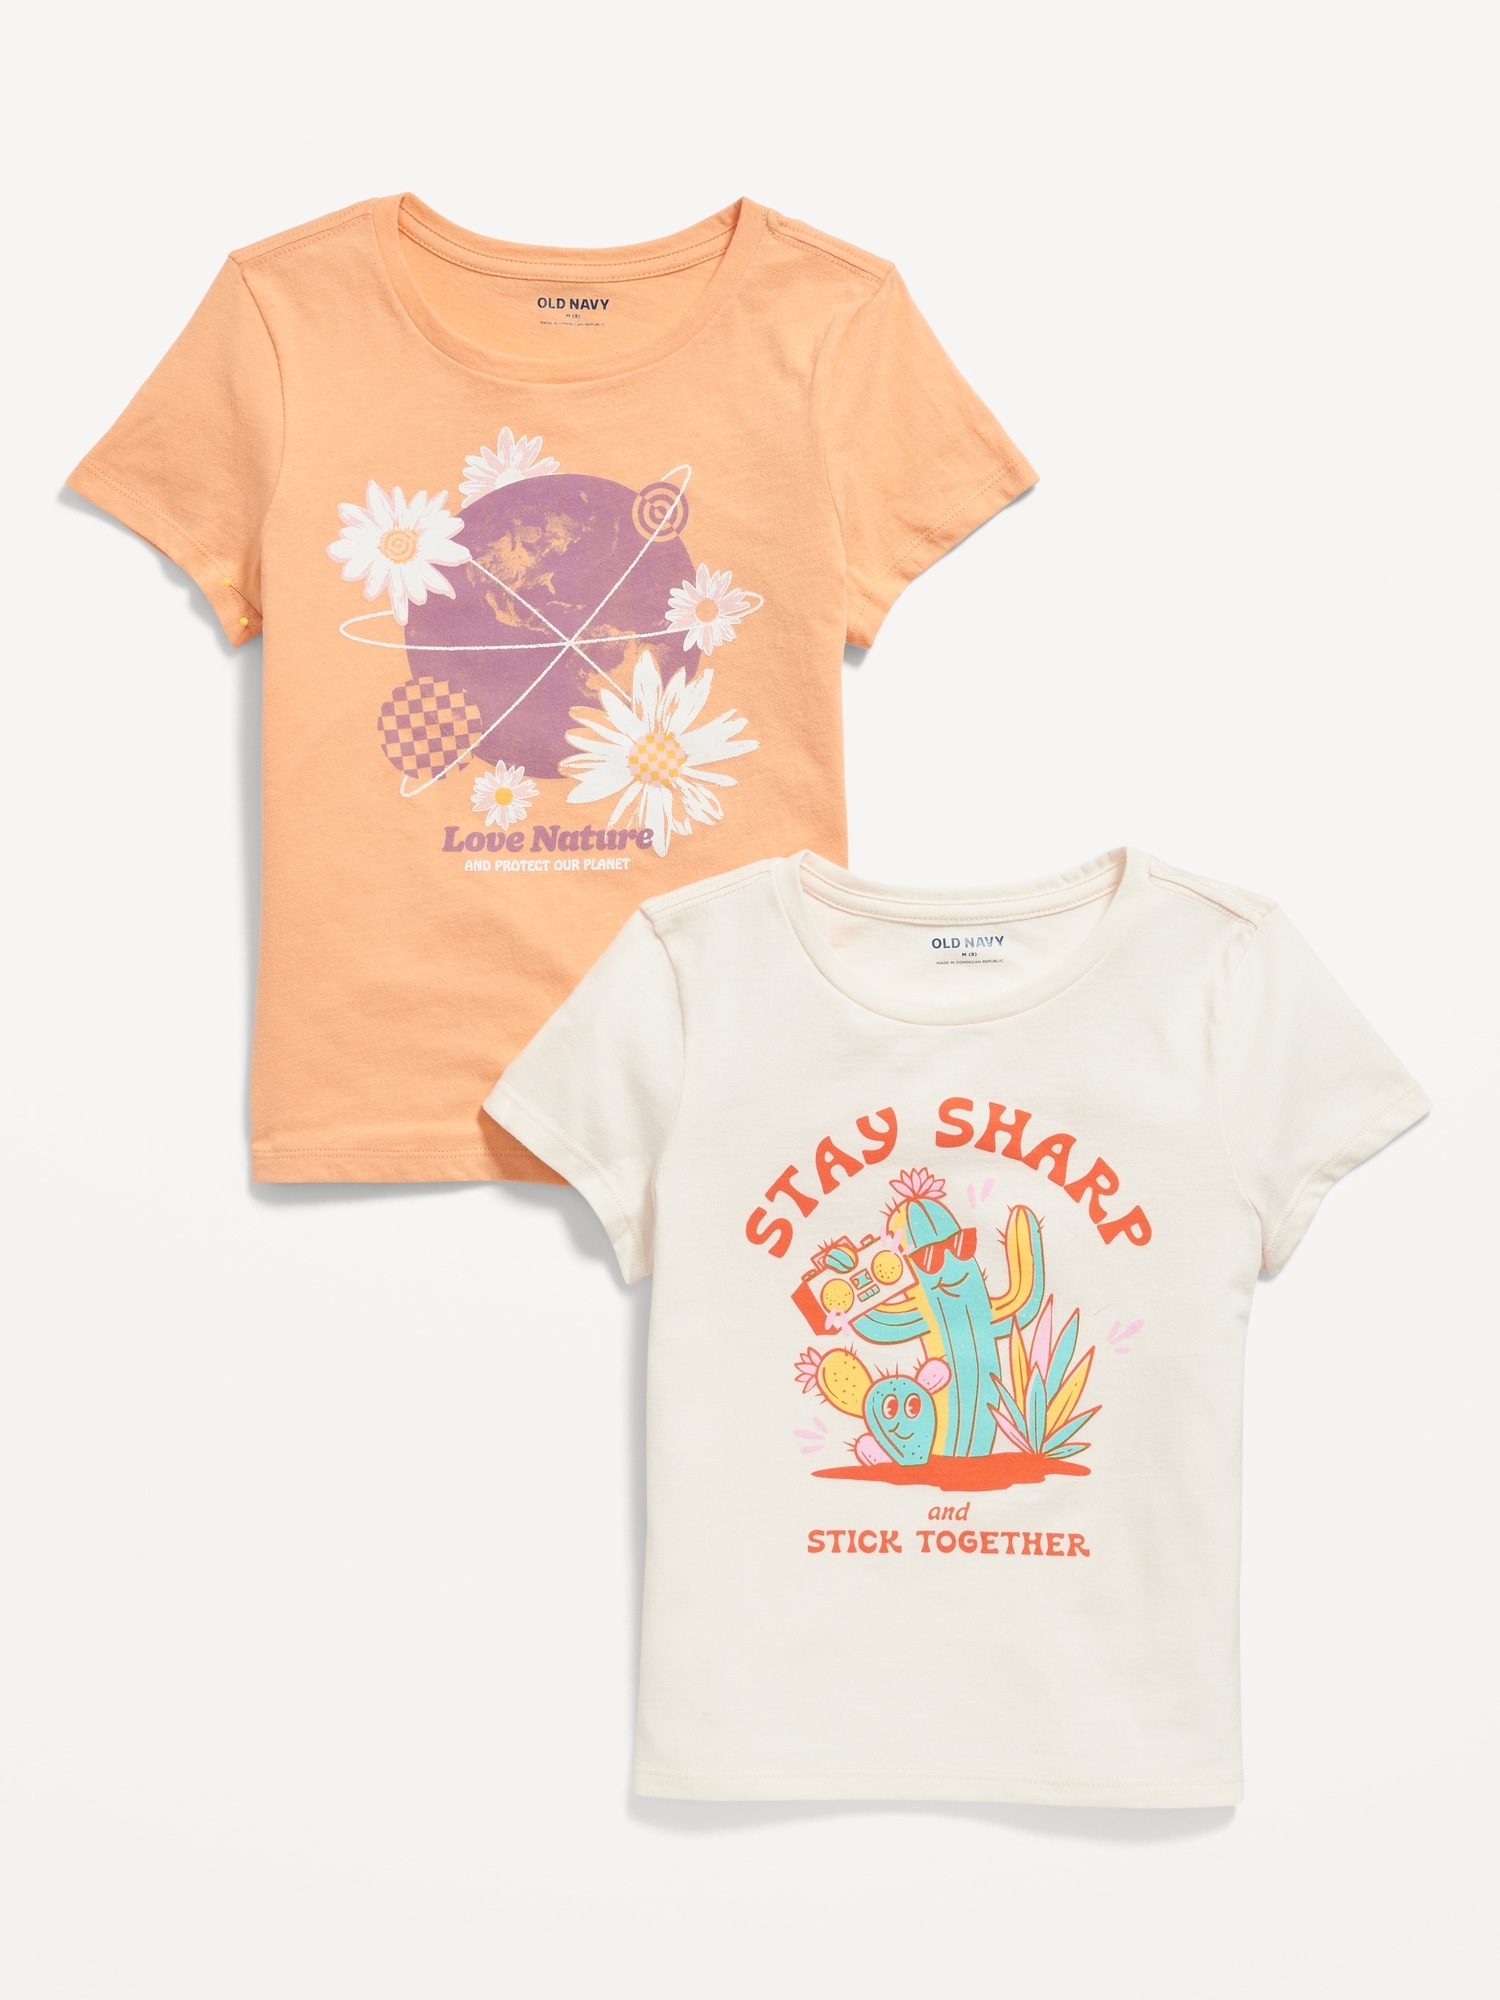 Short-Sleeve Graphic T-Shirt 2-Pack for Girls | Old Navy